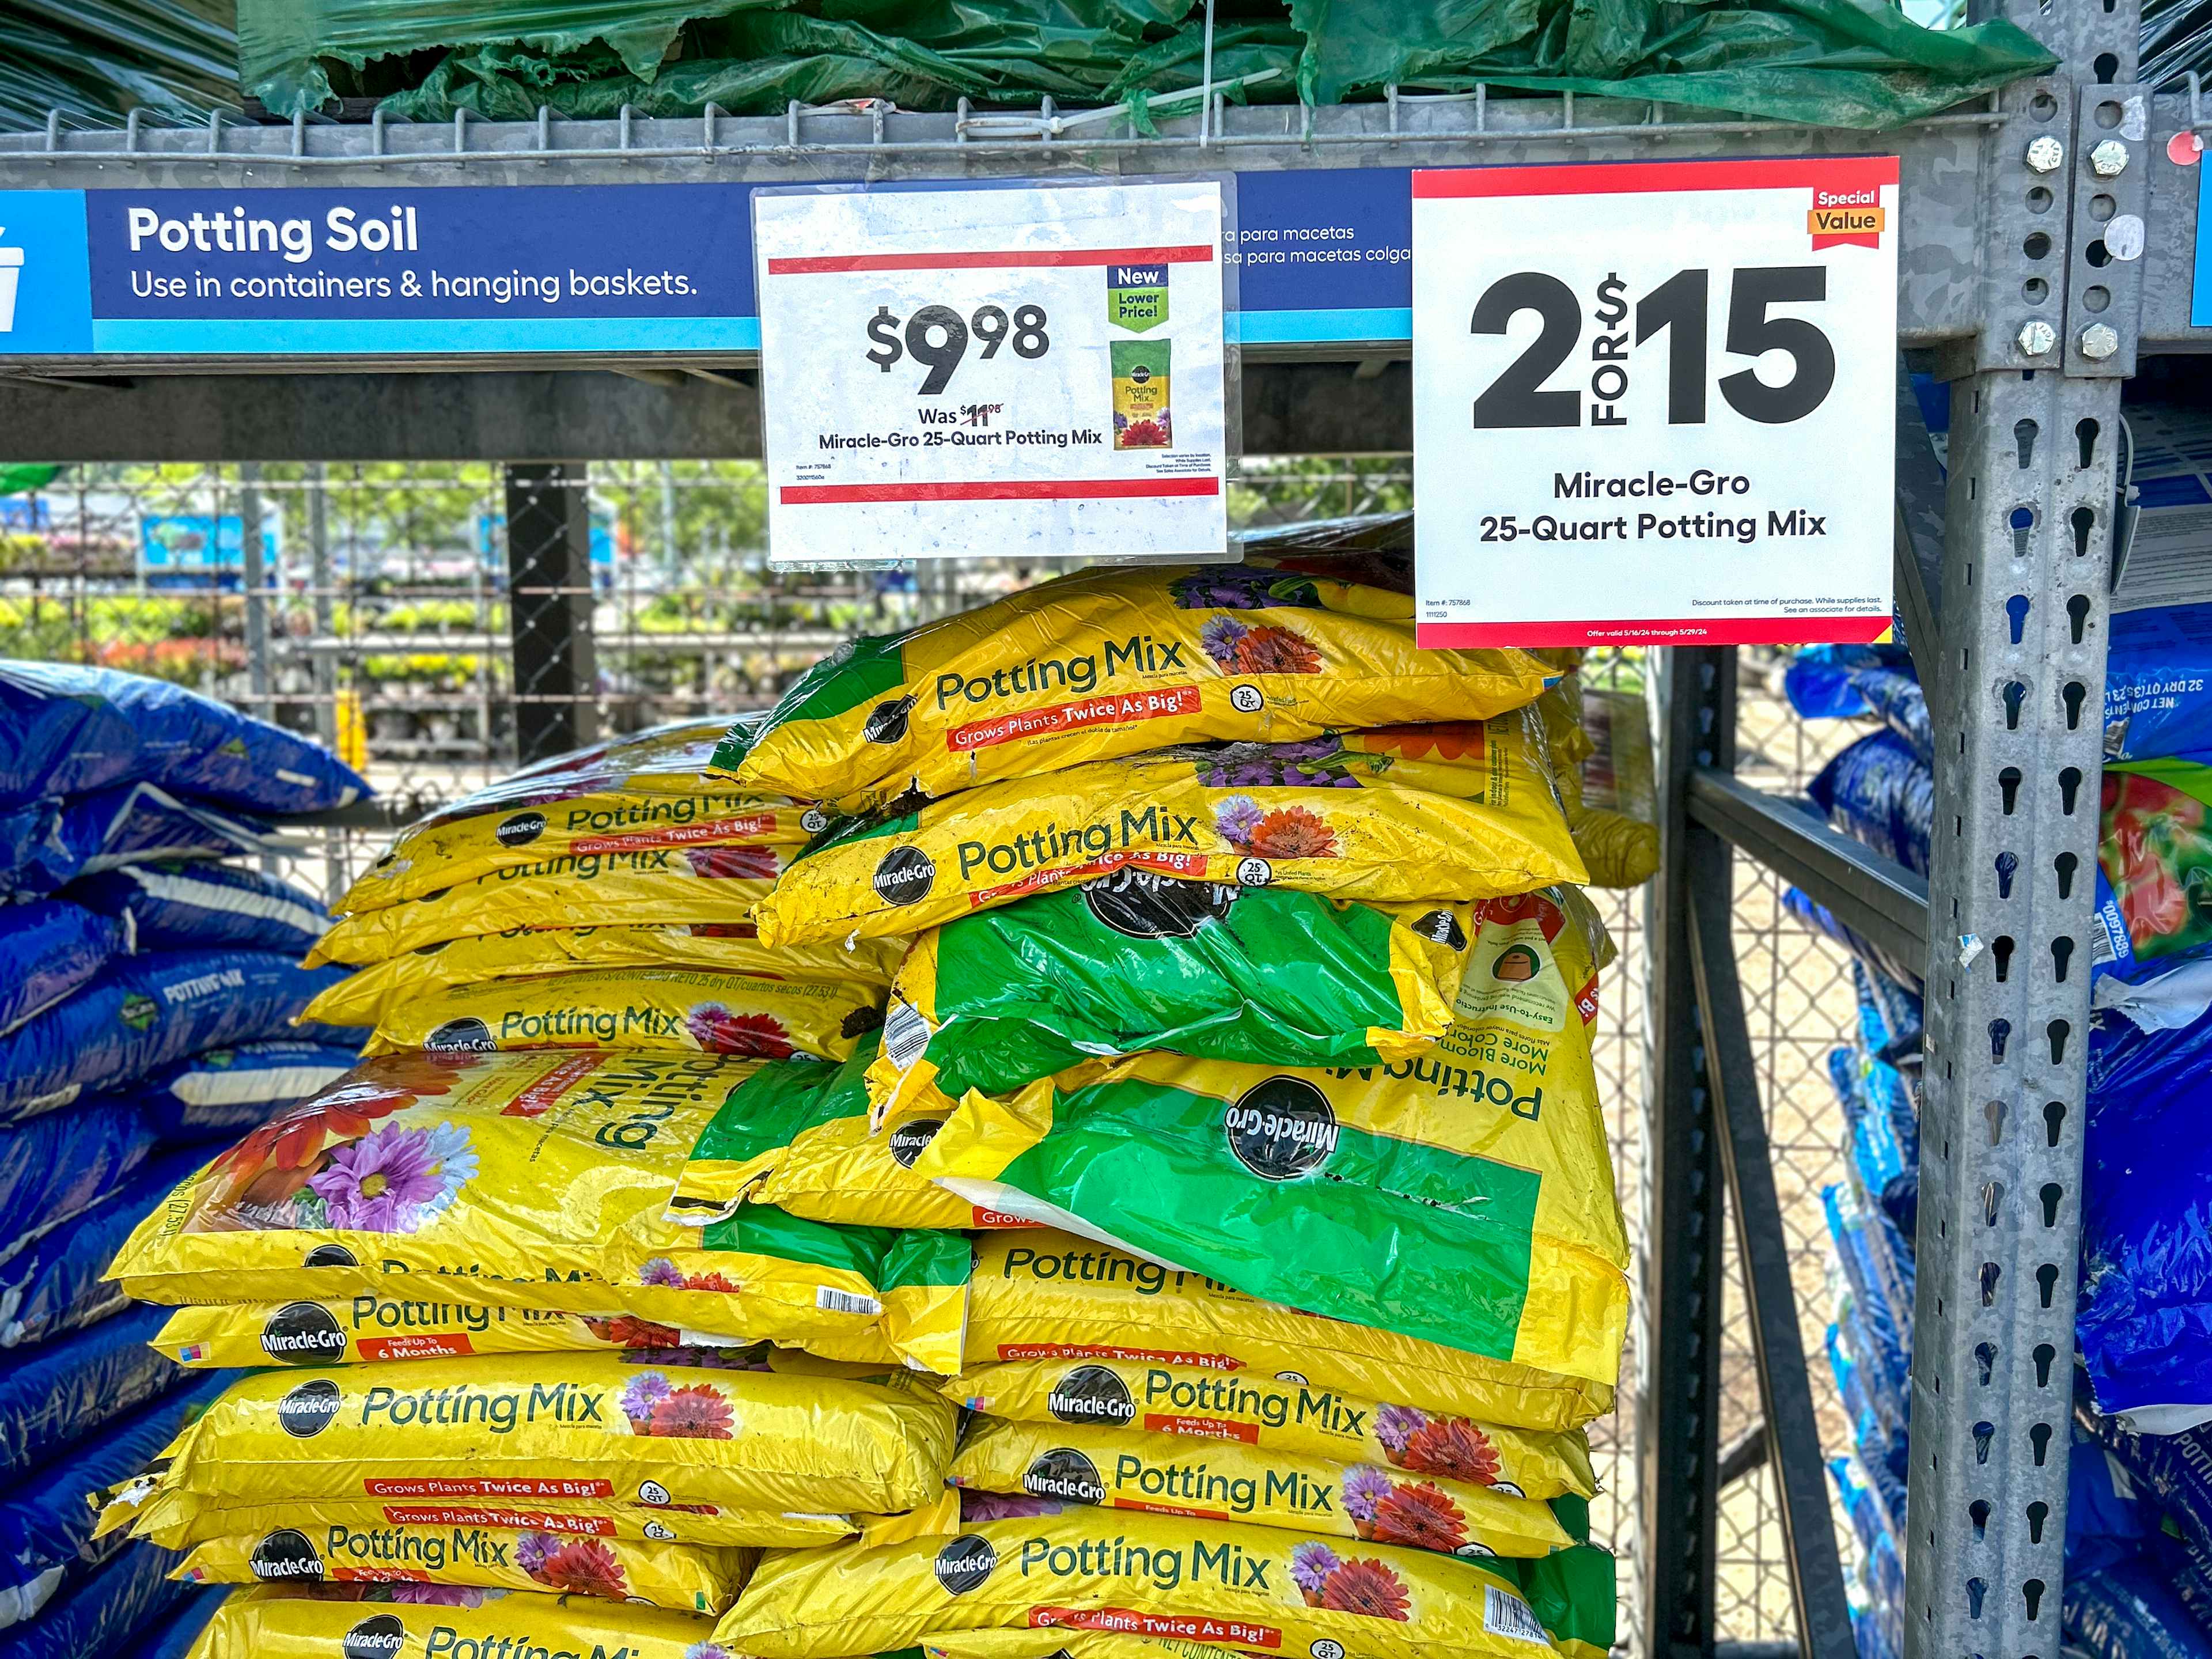 lowes-memorial-day-sale-potting-mix-kcl